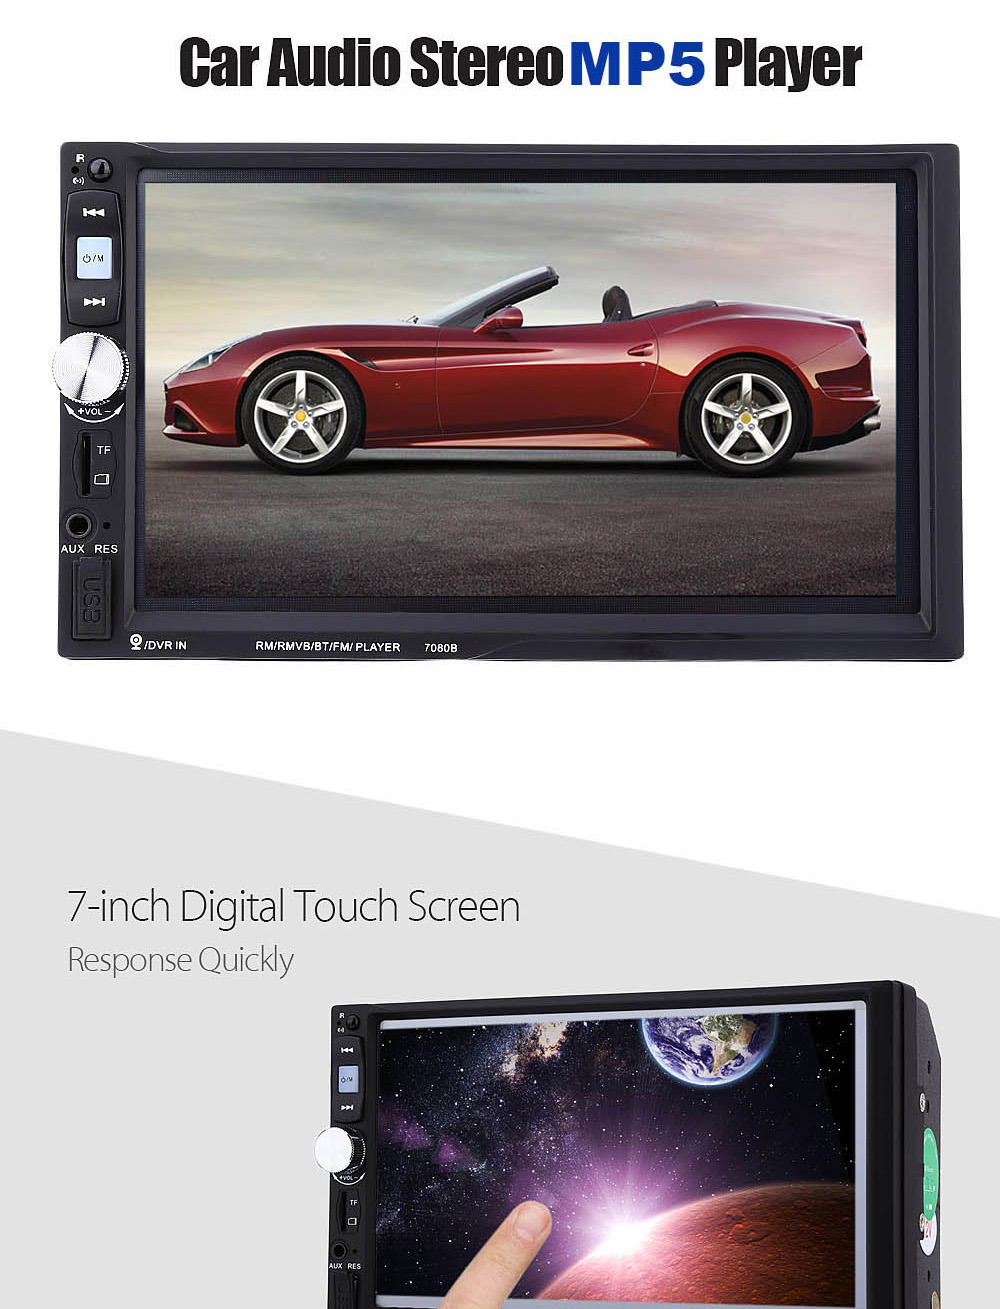 7080B 7 inch Car Audio Stereo MP5 Player 12V Auto Video Remote Control with Rearview Camera